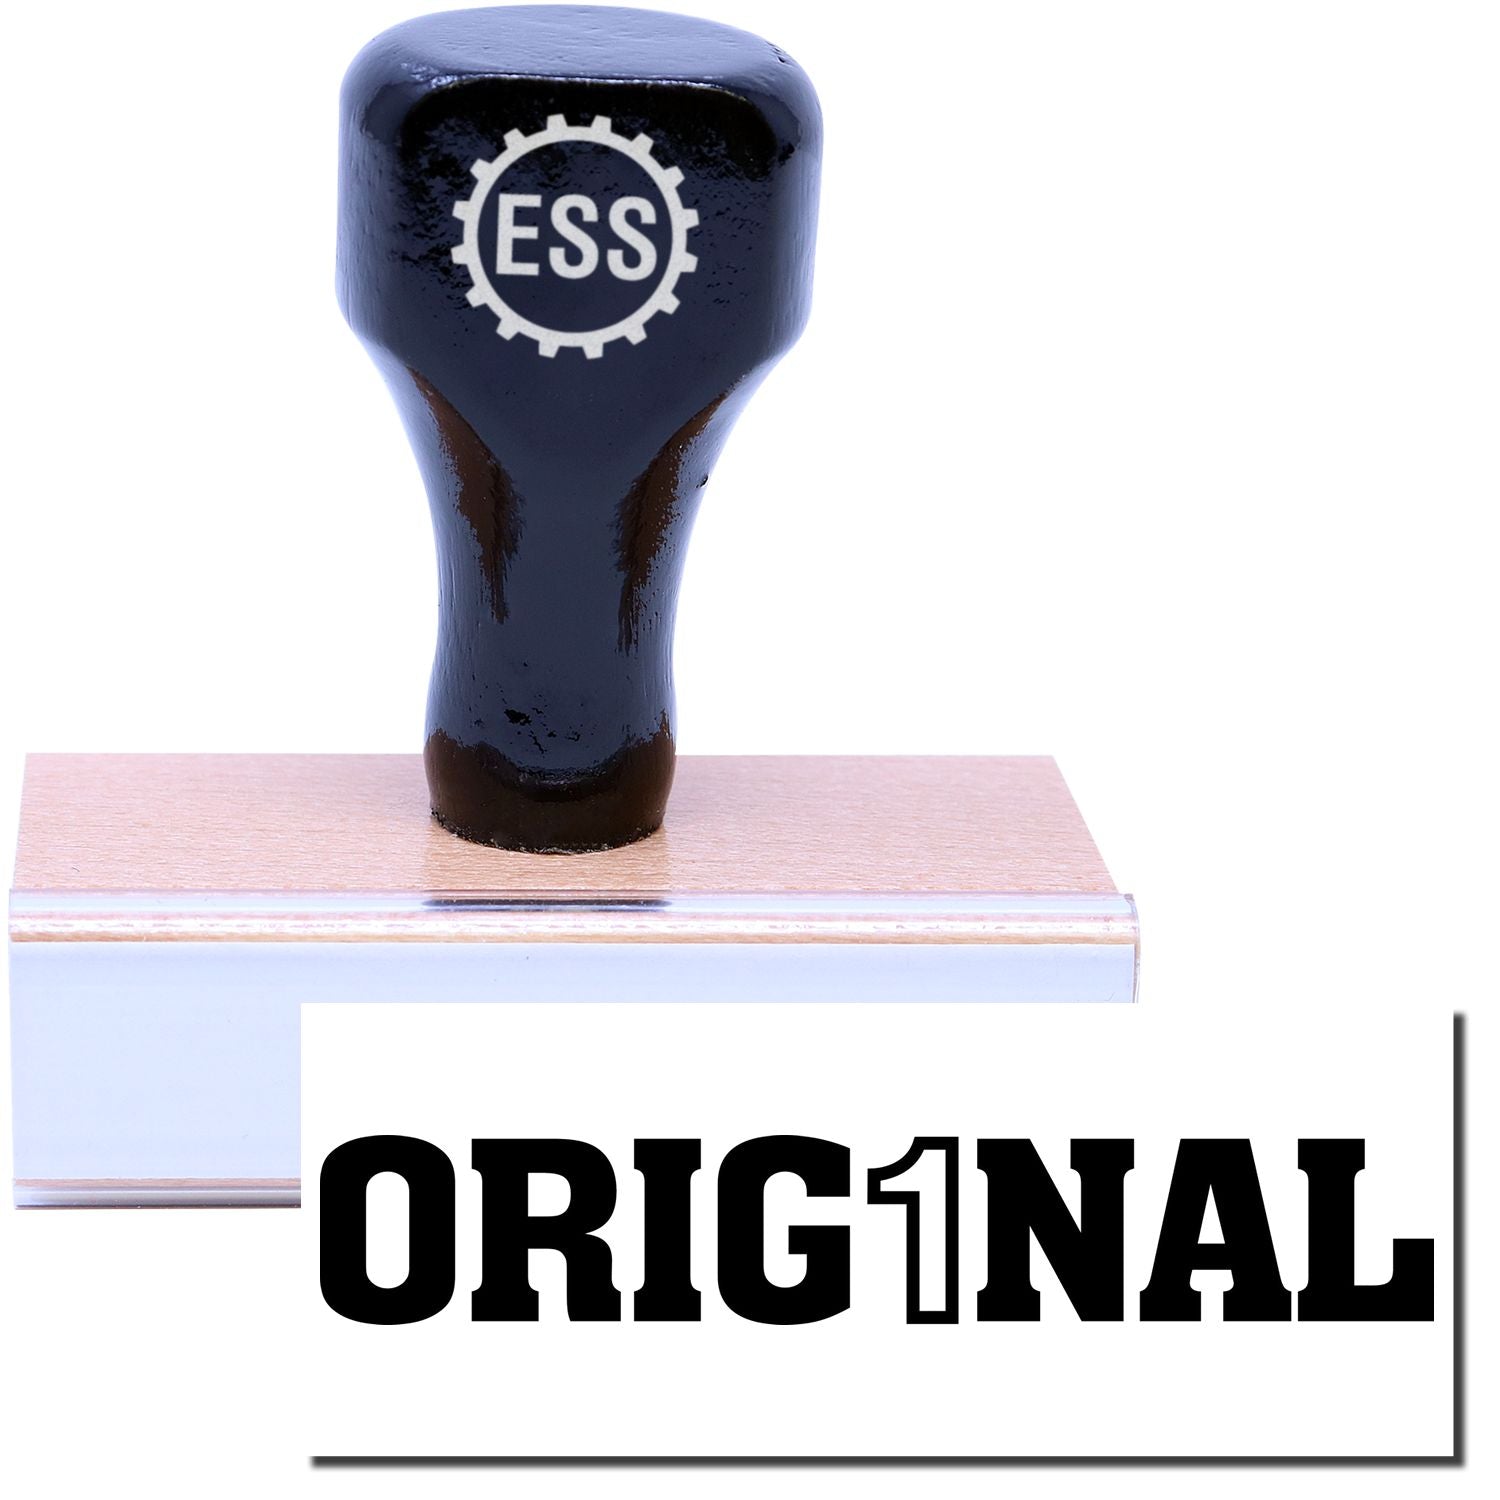 A stock office rubber stamp with a stamped image showing how the text "ORIG1NAL" is displayed after stamping.